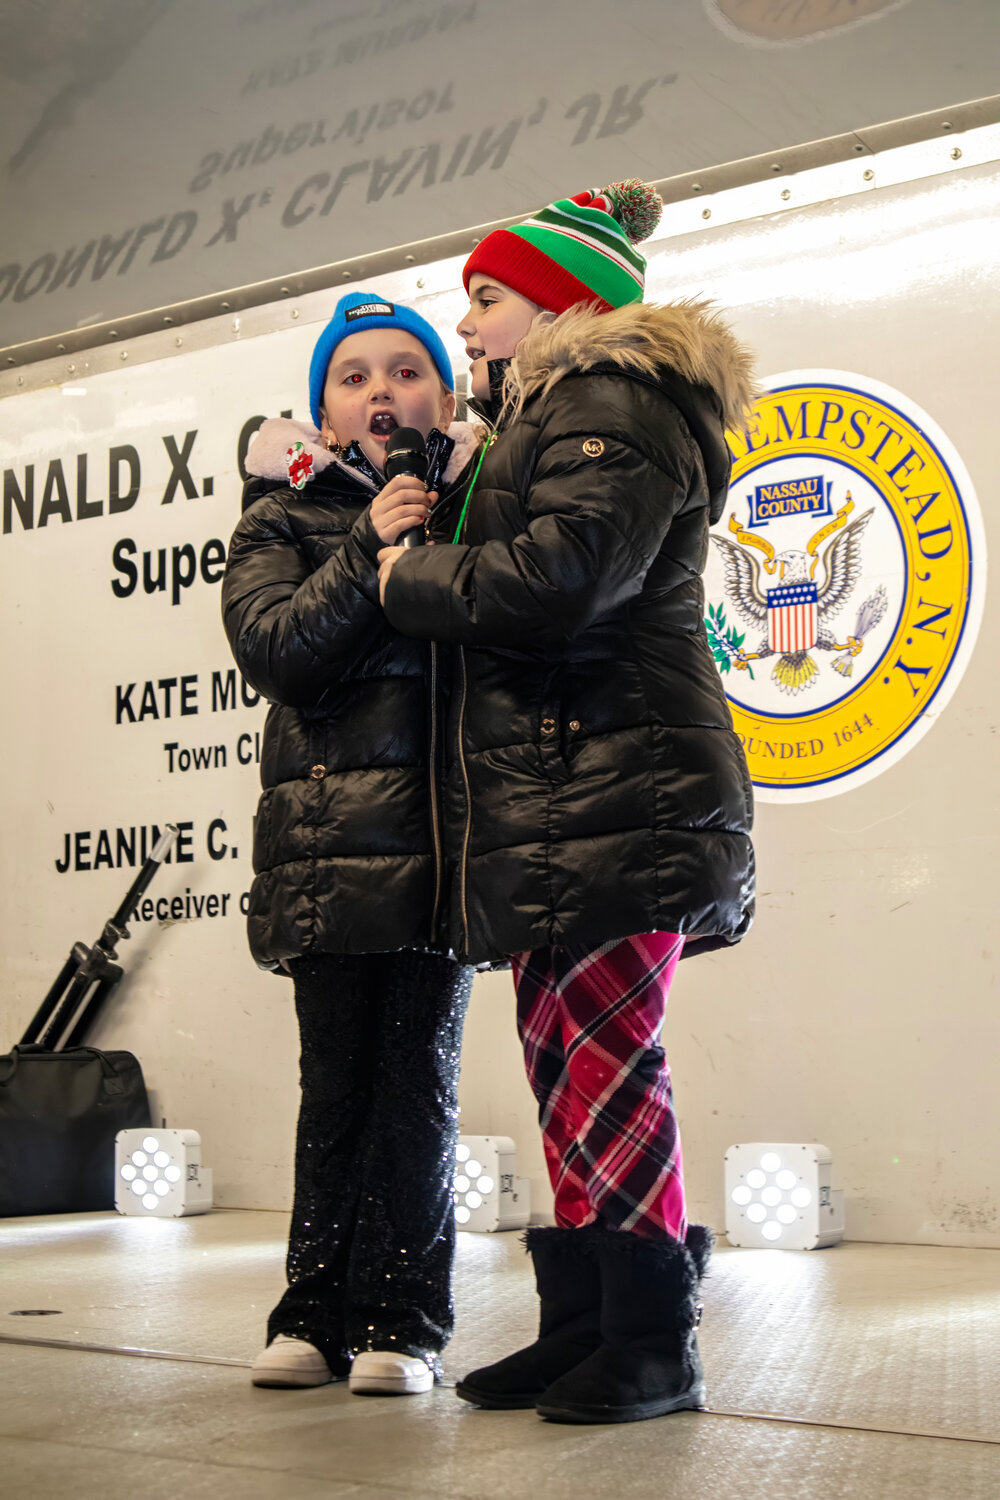 Alyssa Fratarcangeli, 8, and Mia Abreu, 8, sang a Chanukah song on stage at the Lidl shopping center for community members at the first tree lighting ceremony of the holiday season.